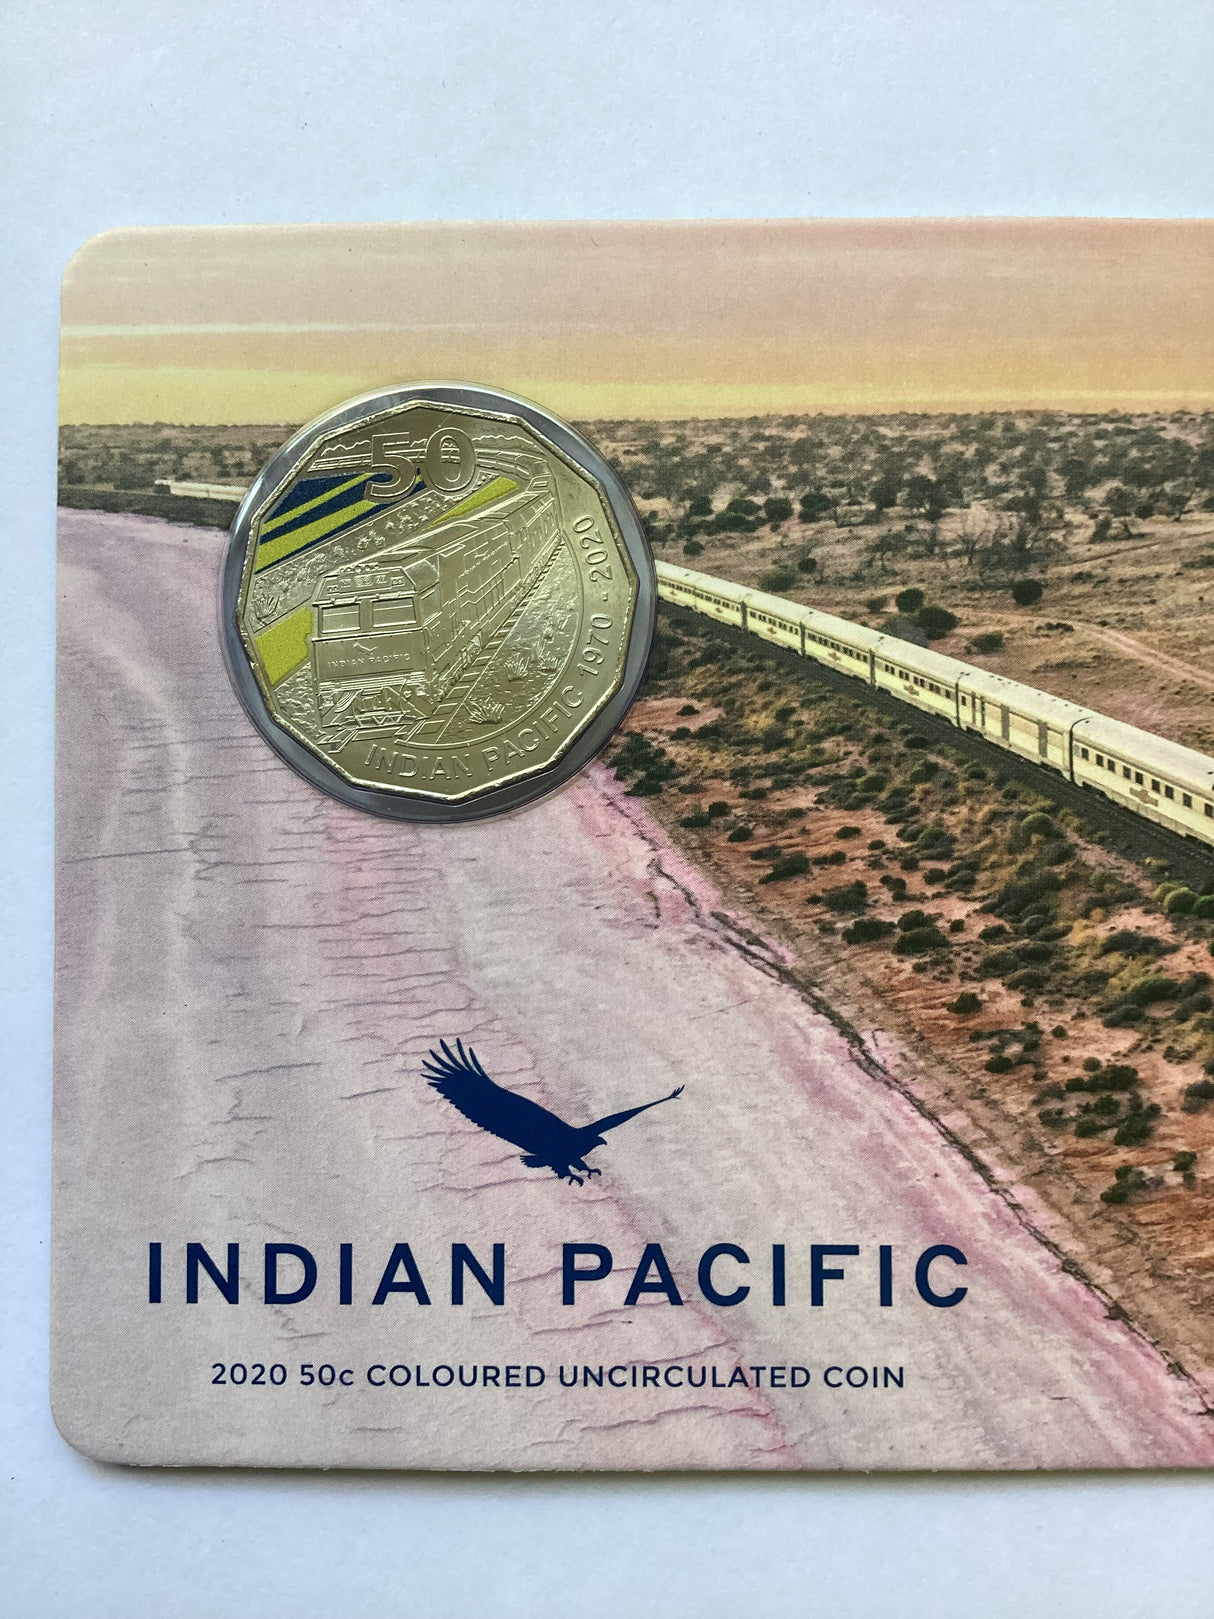 2020 50c Indian Pacific Coloured Uncirculated Coin